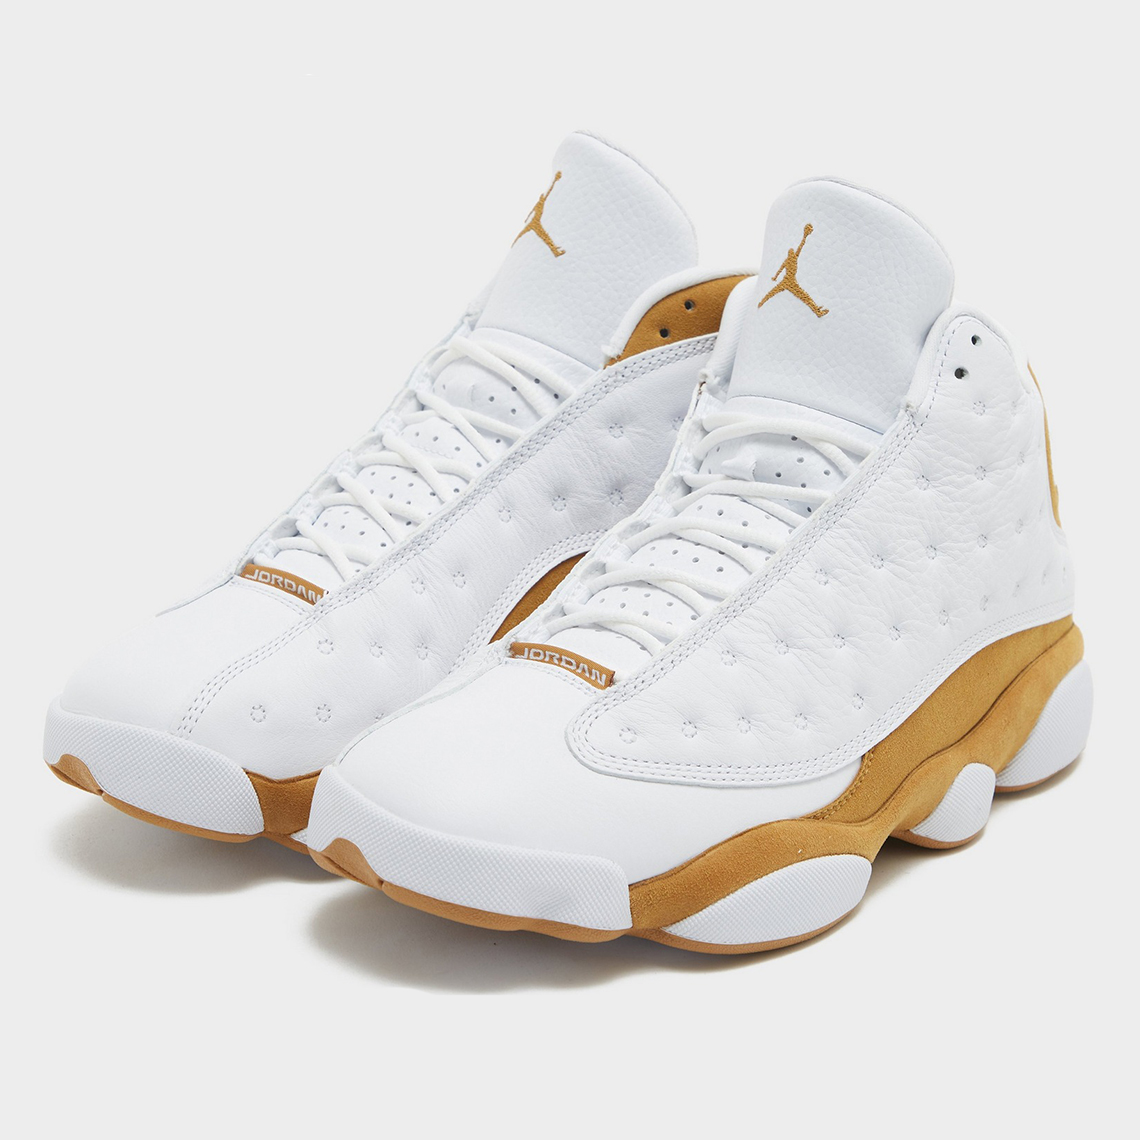 Part of Jordan Brand s upcoming Spring Summer 2020 lineup will include an all-new Wheat 414571 171 Release Date 6